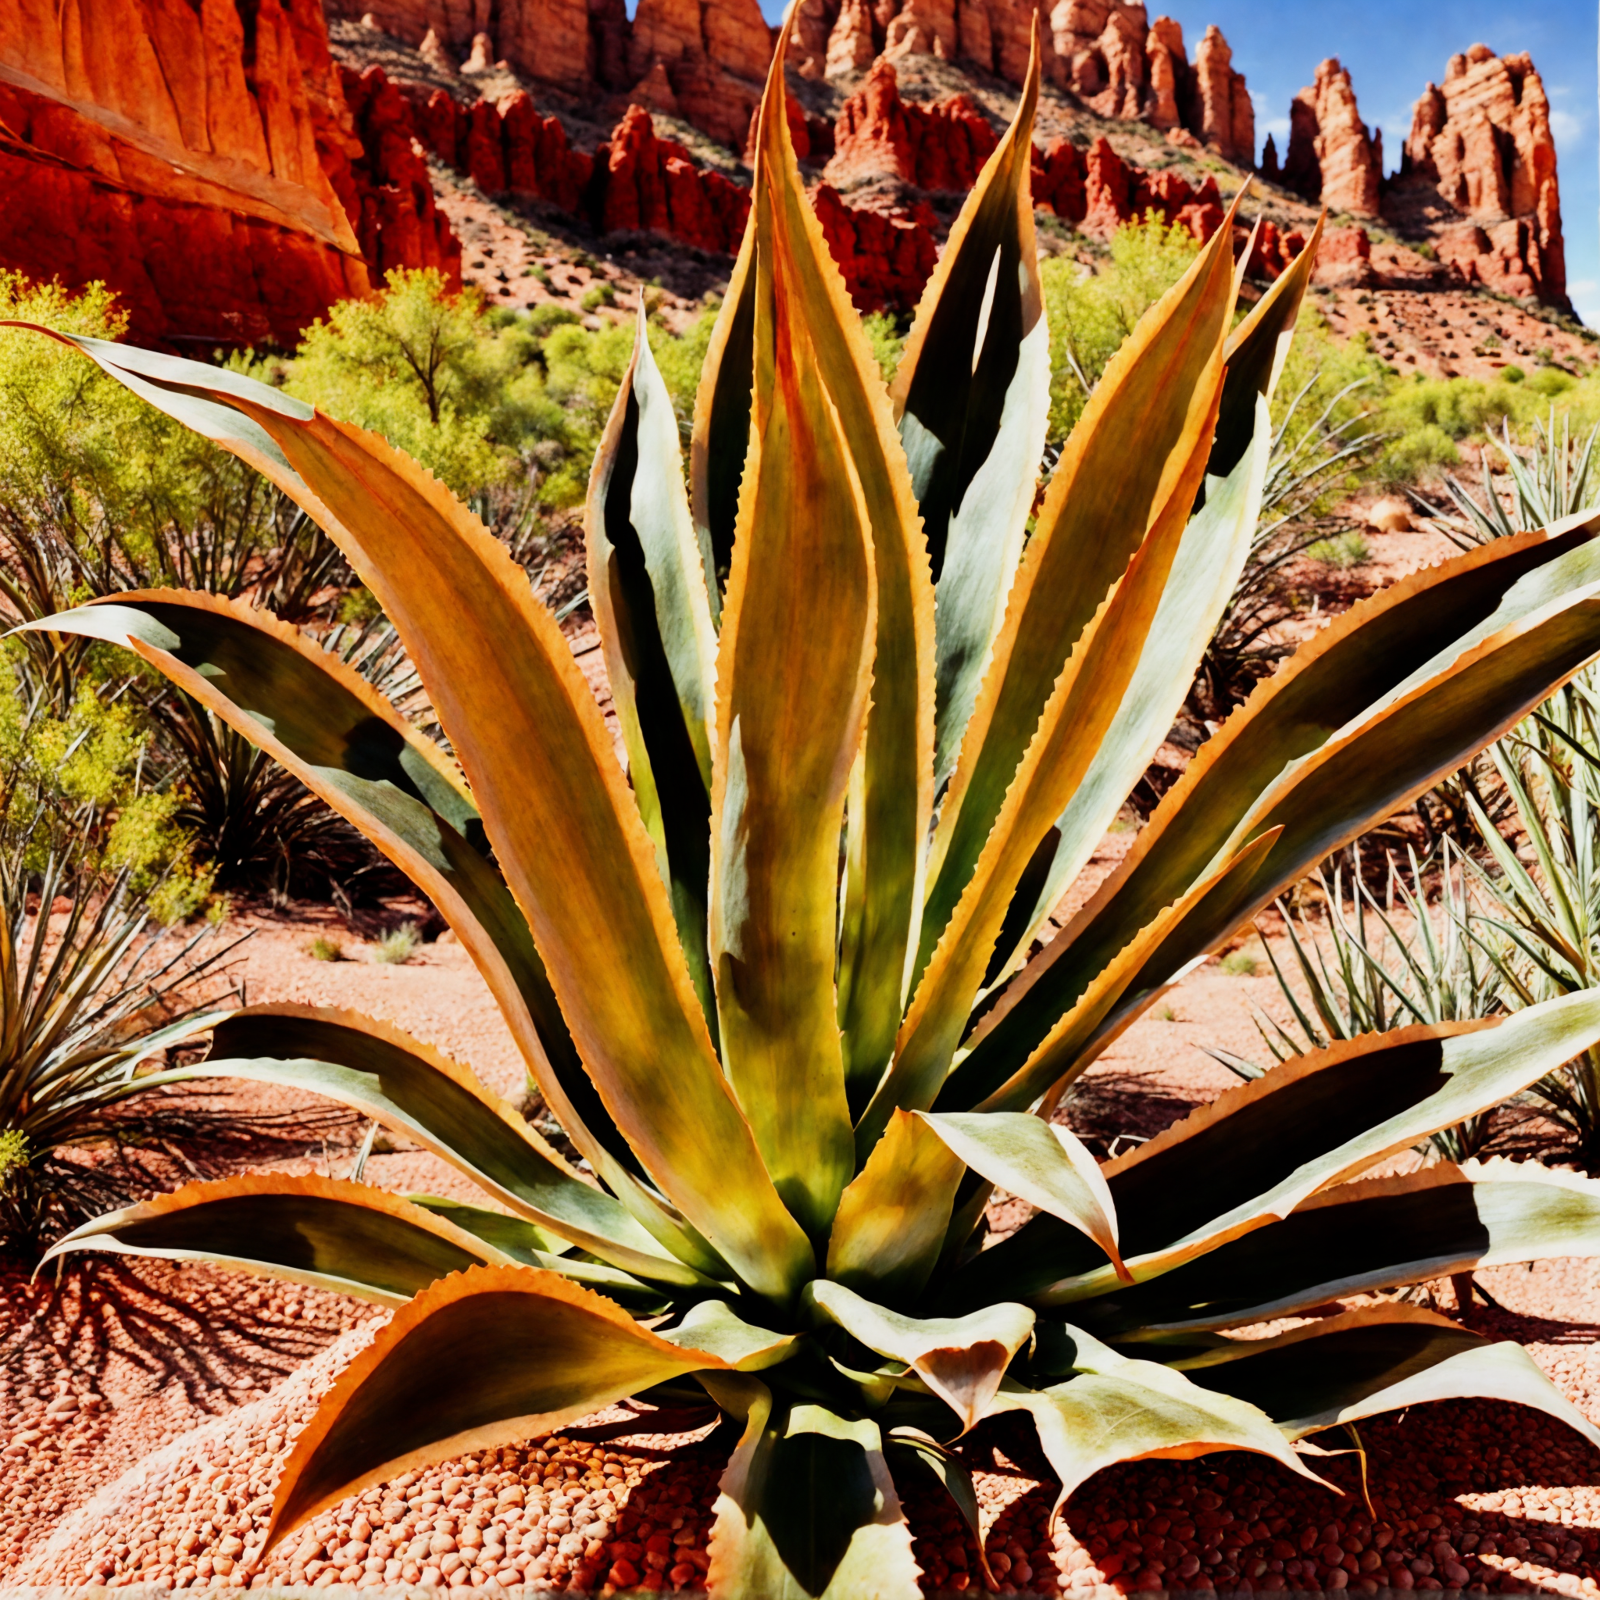 Agave americana with thick leaves thriving among desert flora, under bright Arizona sunlight.